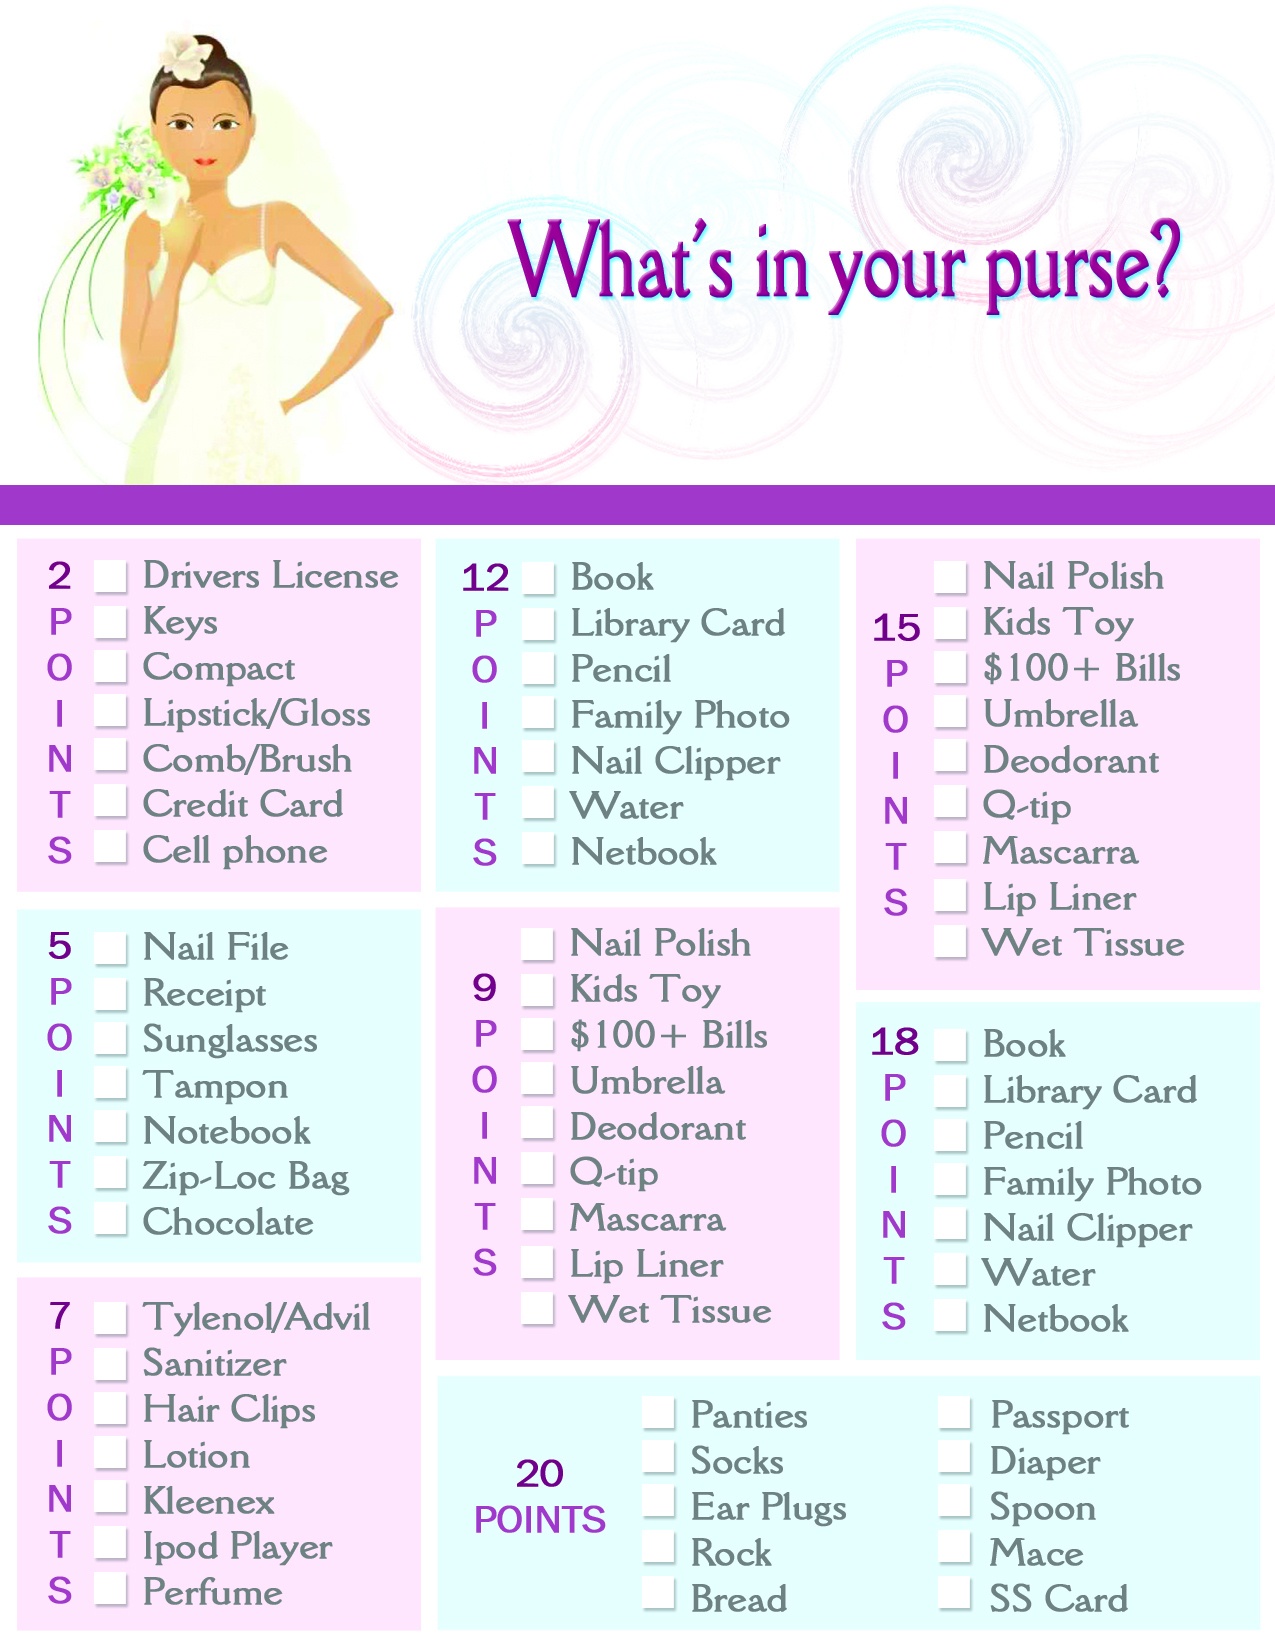 Photo : I Spy Bridal Shower Image - Free Printable Bridal Shower Games What&amp;#039;s In Your Purse